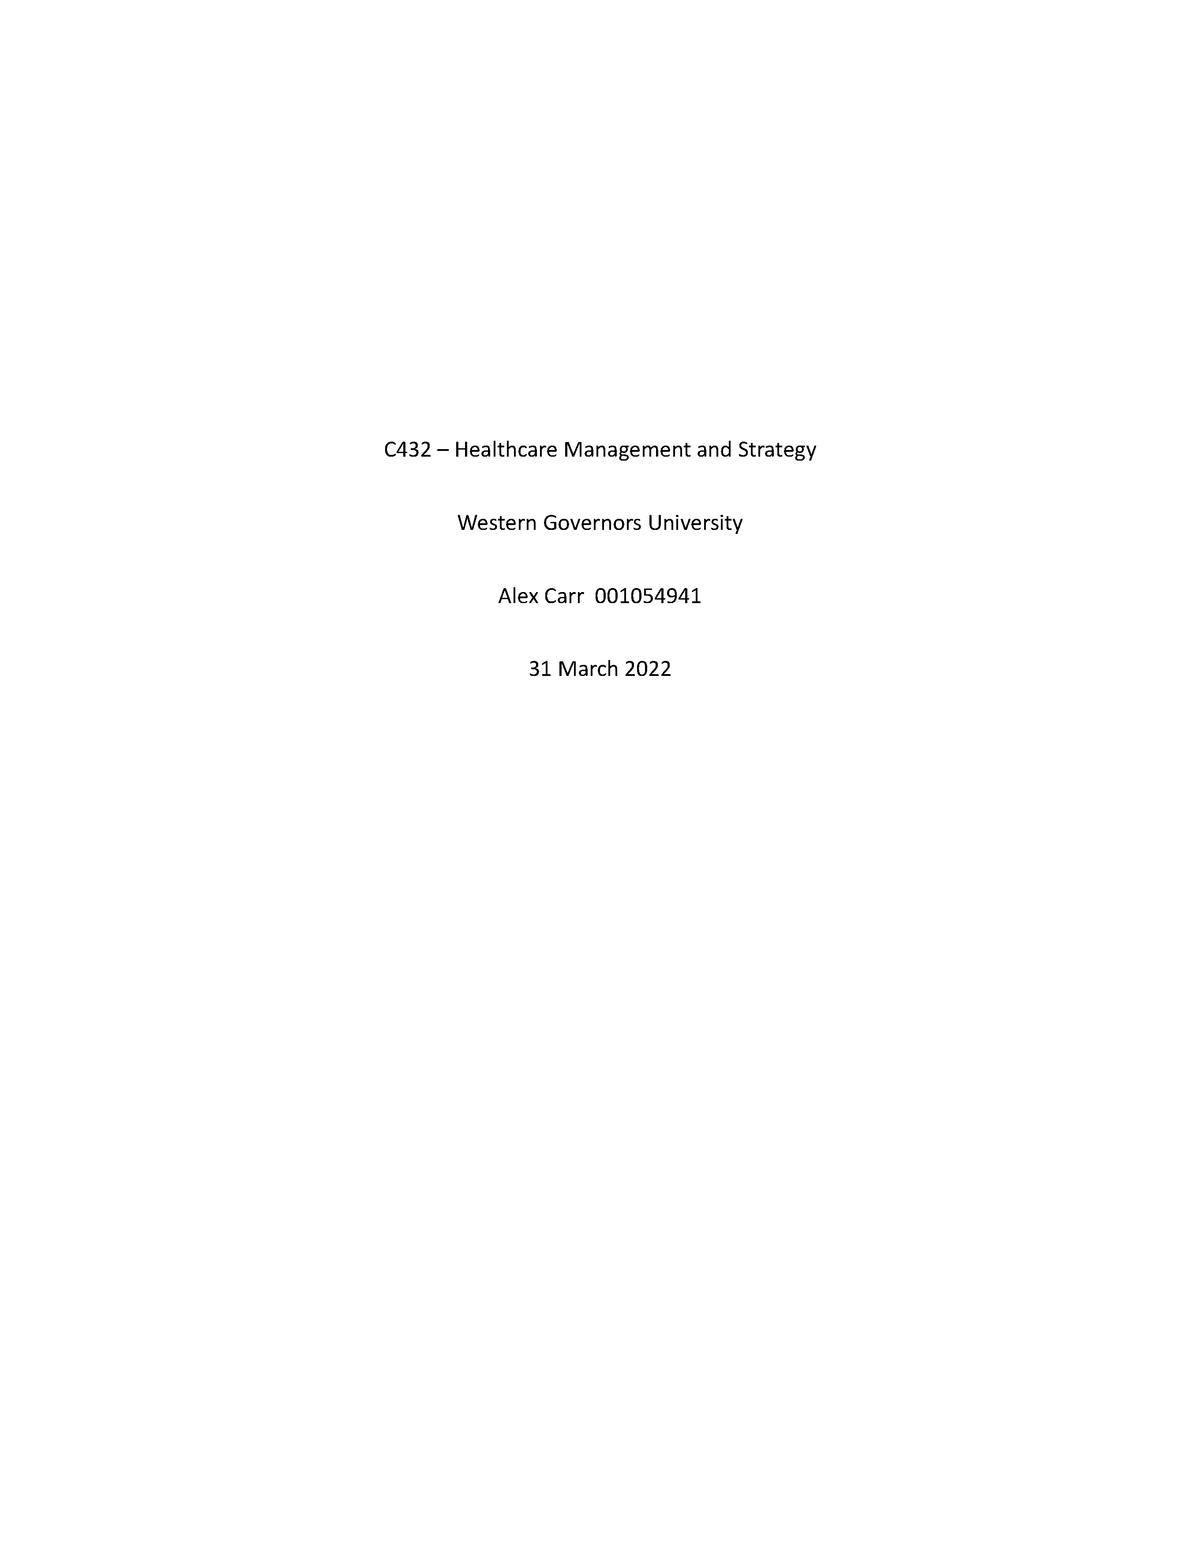 C432 - Passed first attempt - C432 – Healthcare Management and Strategy ...